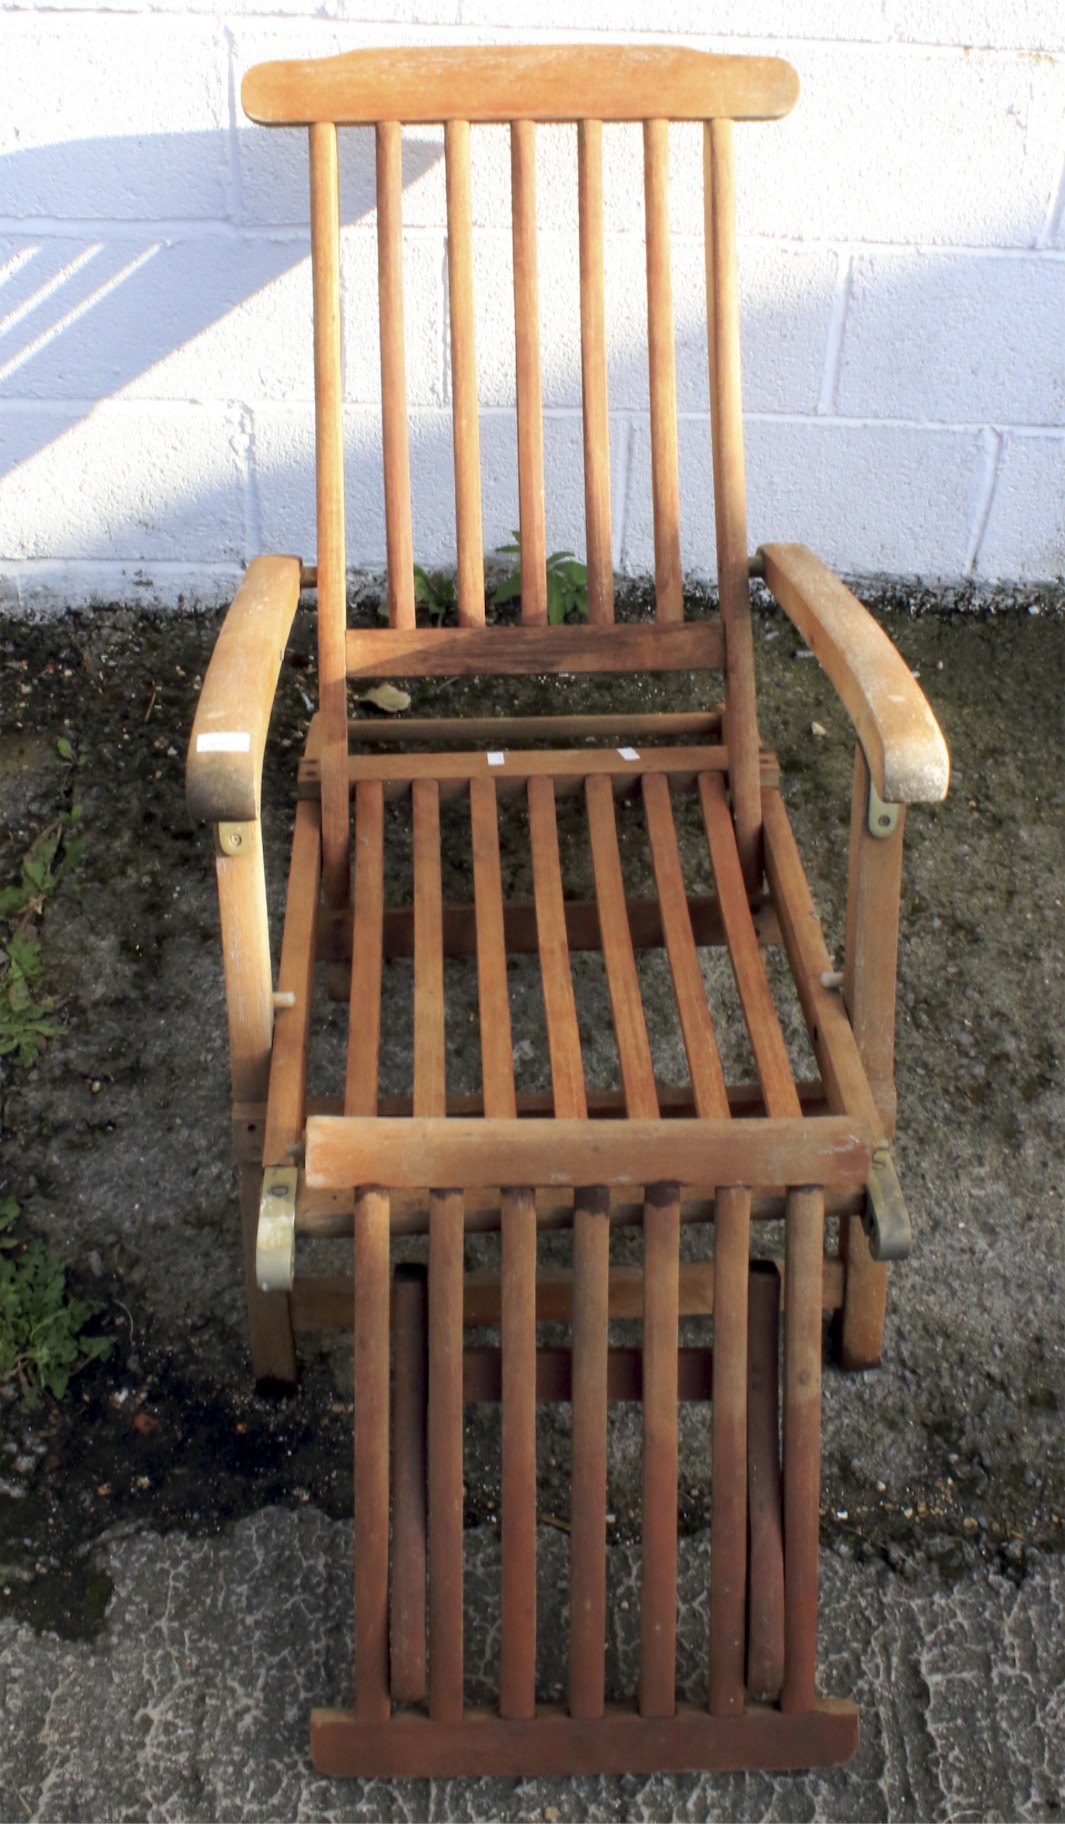 A contemporary wooden slatted garden sun chair. - Image 2 of 2